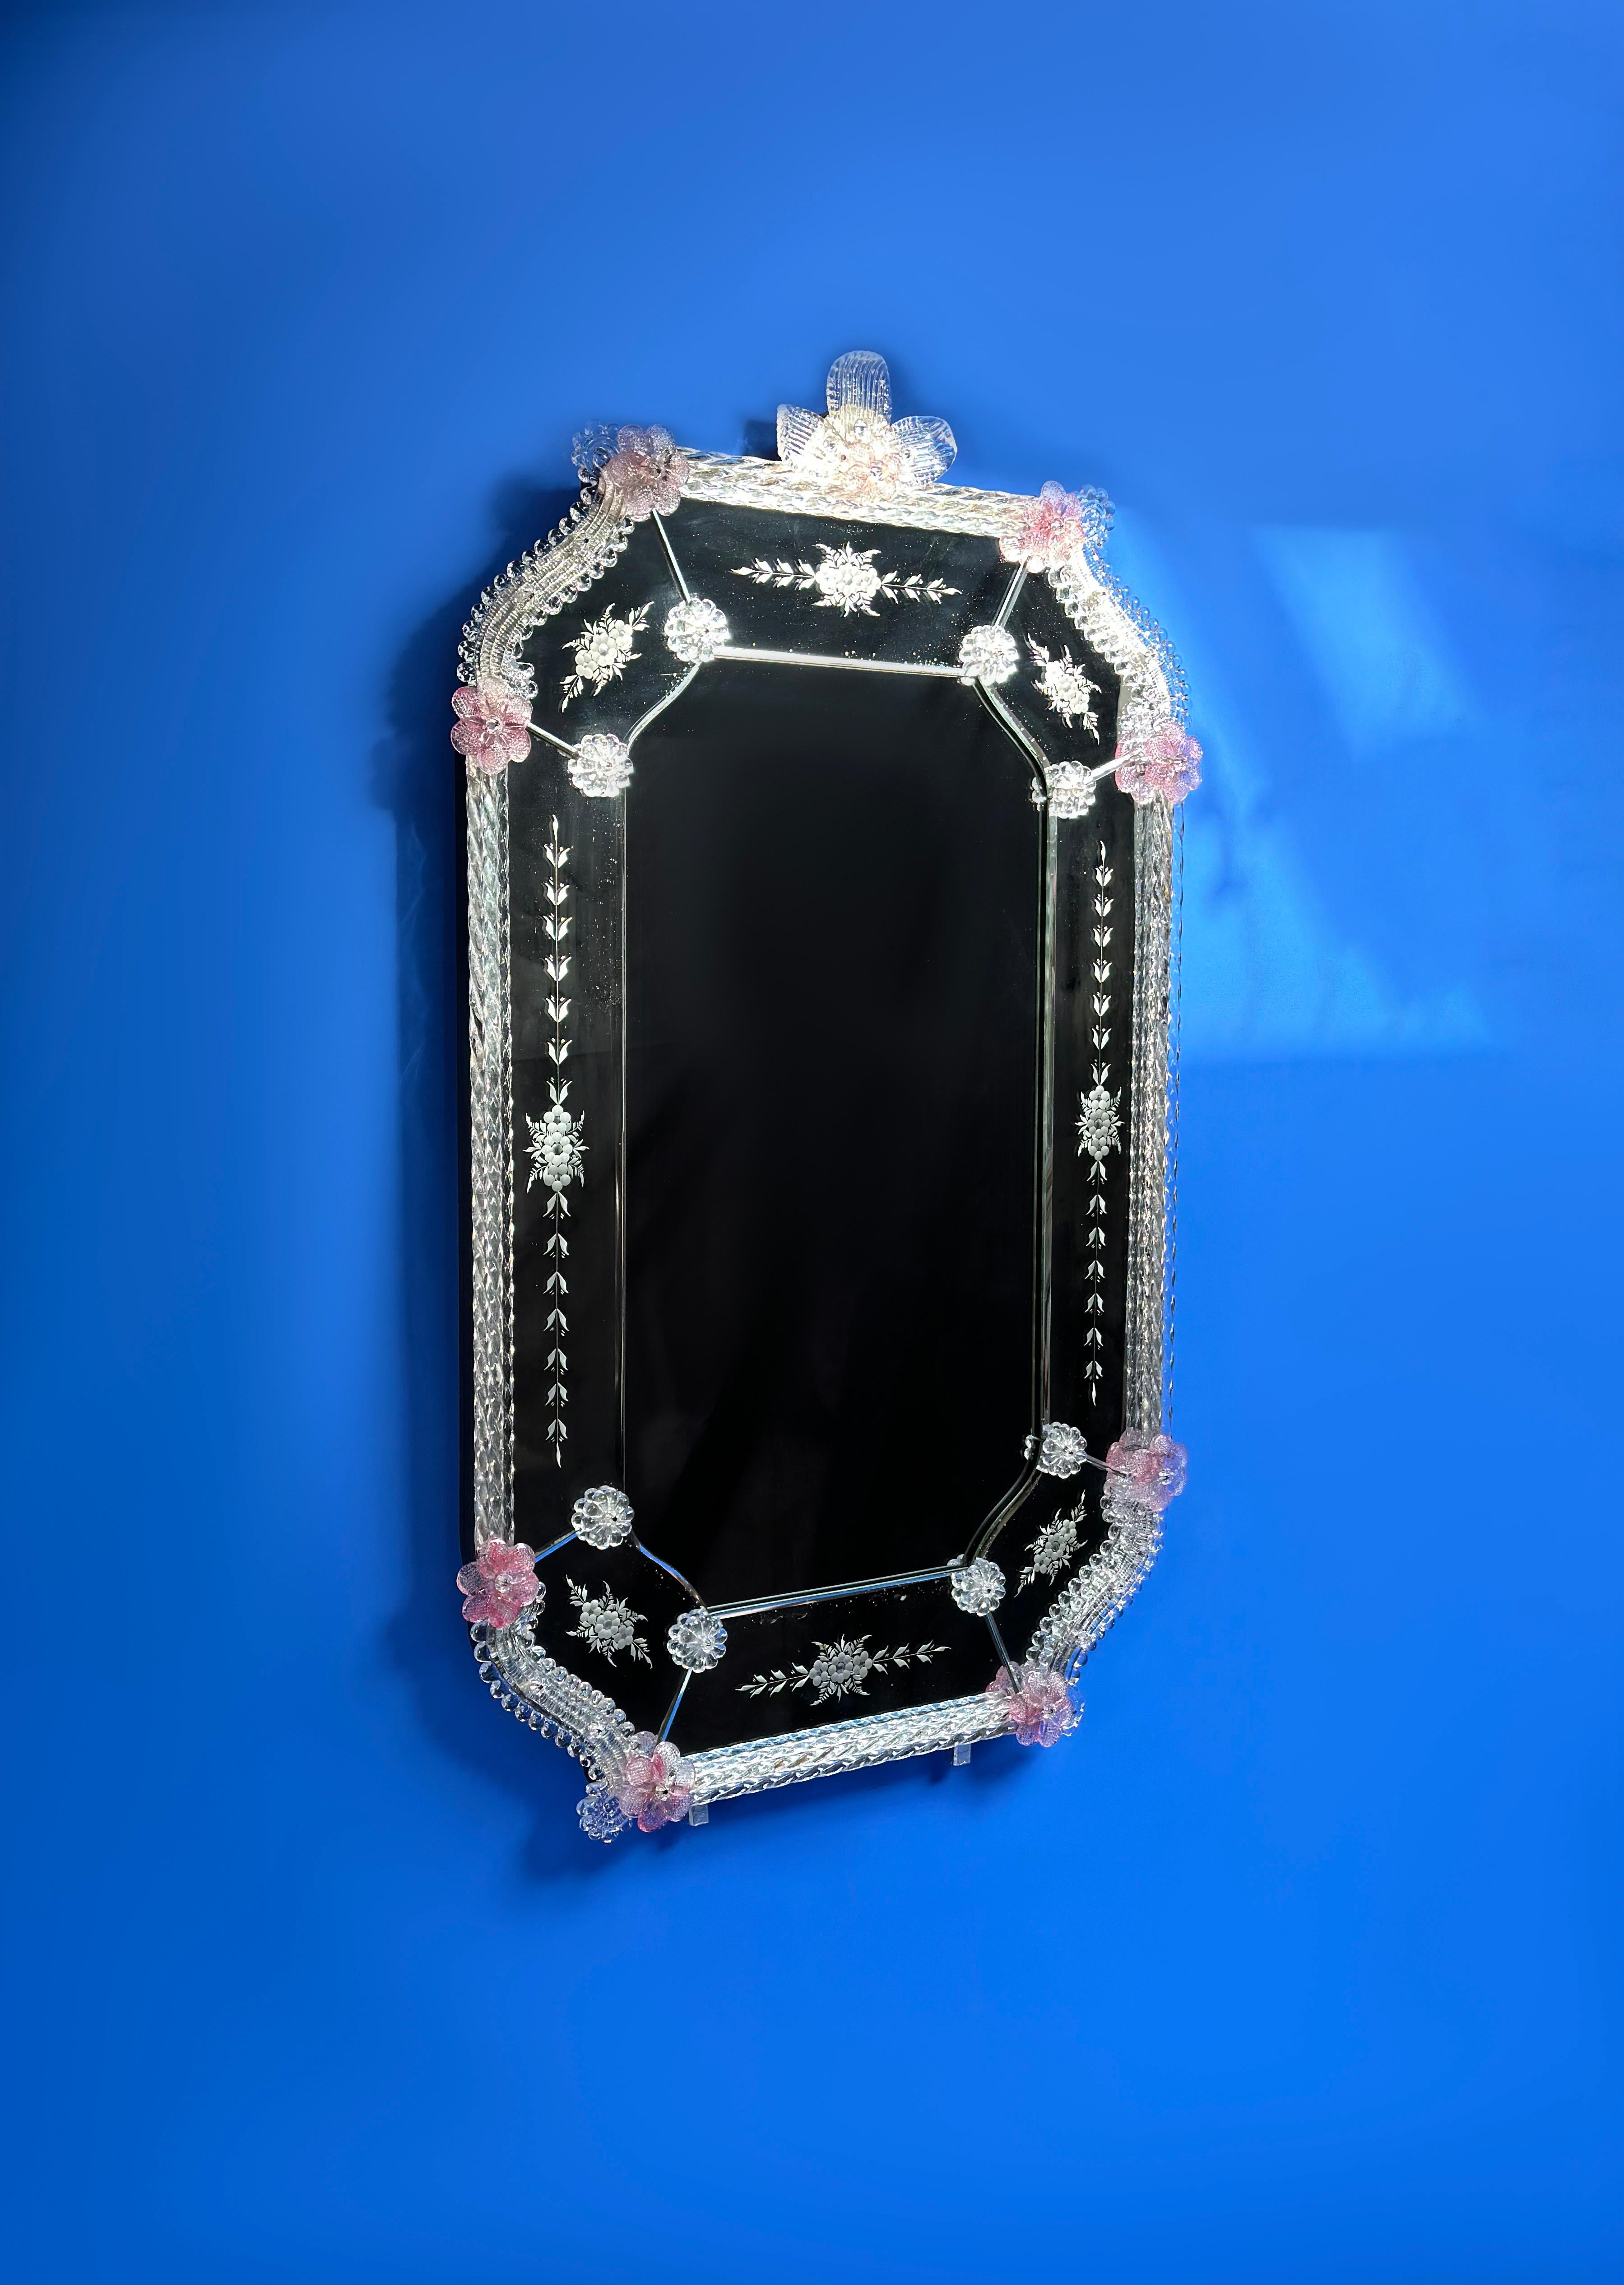 An elegant Venetian Glass wall mirror. Handmade in Venice in the 1960s

It shows an array of delicate glass embellishments, which have been carefully arranged around an octagonal-shaped frame.

The central mirror is encompassed by 8 panels of